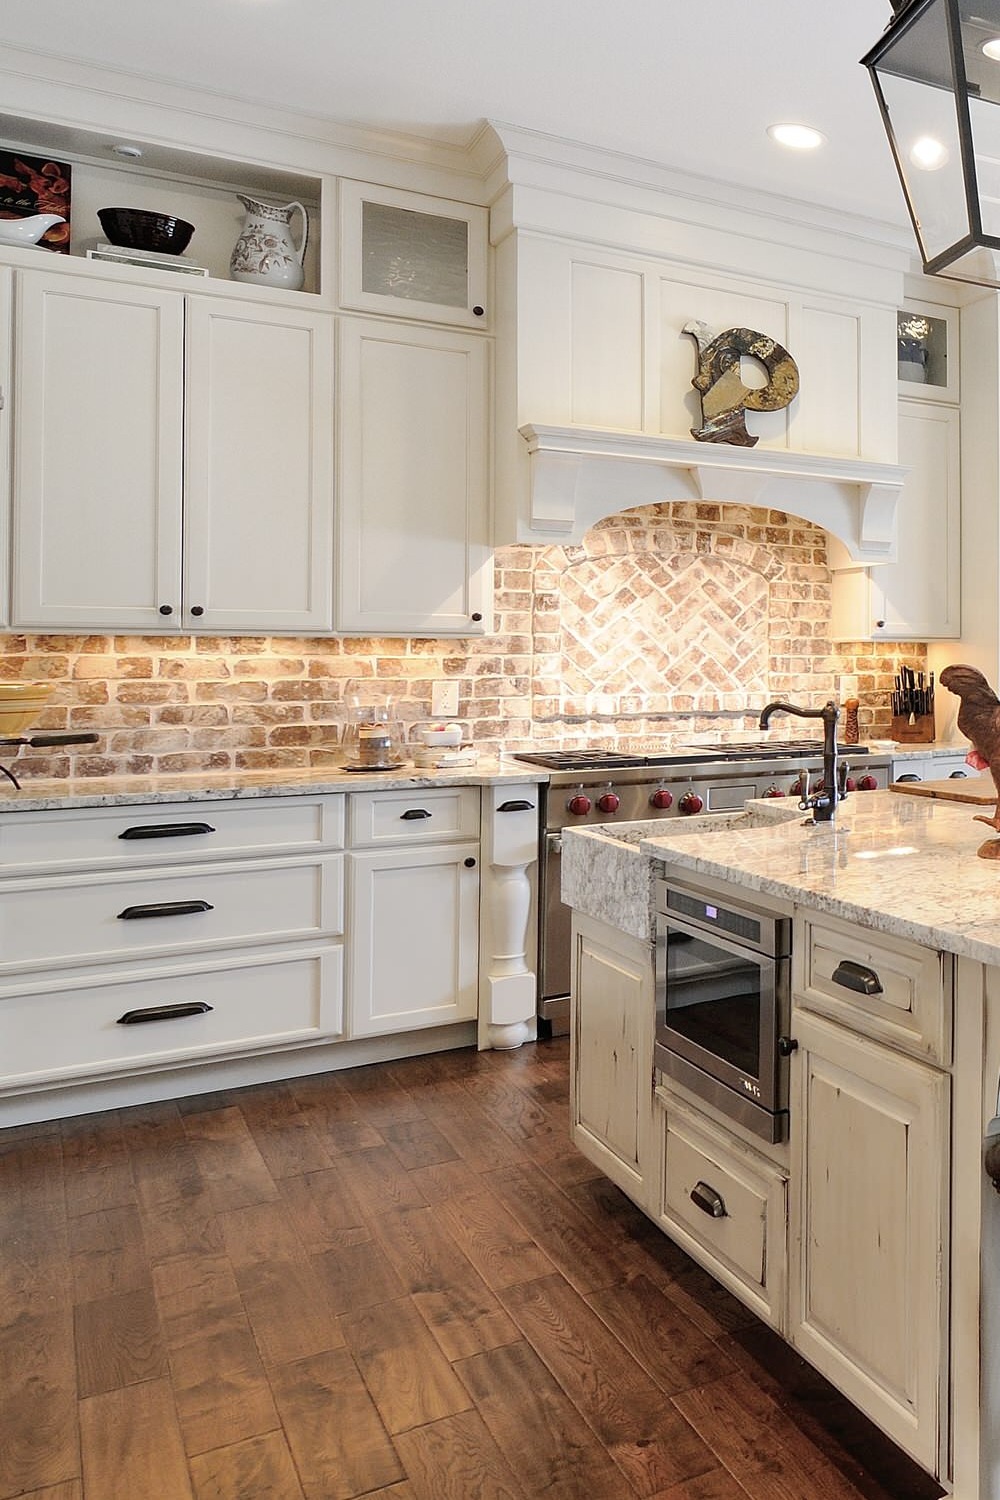 48 Backsplash Ideas For White Countertops and White Cabinets